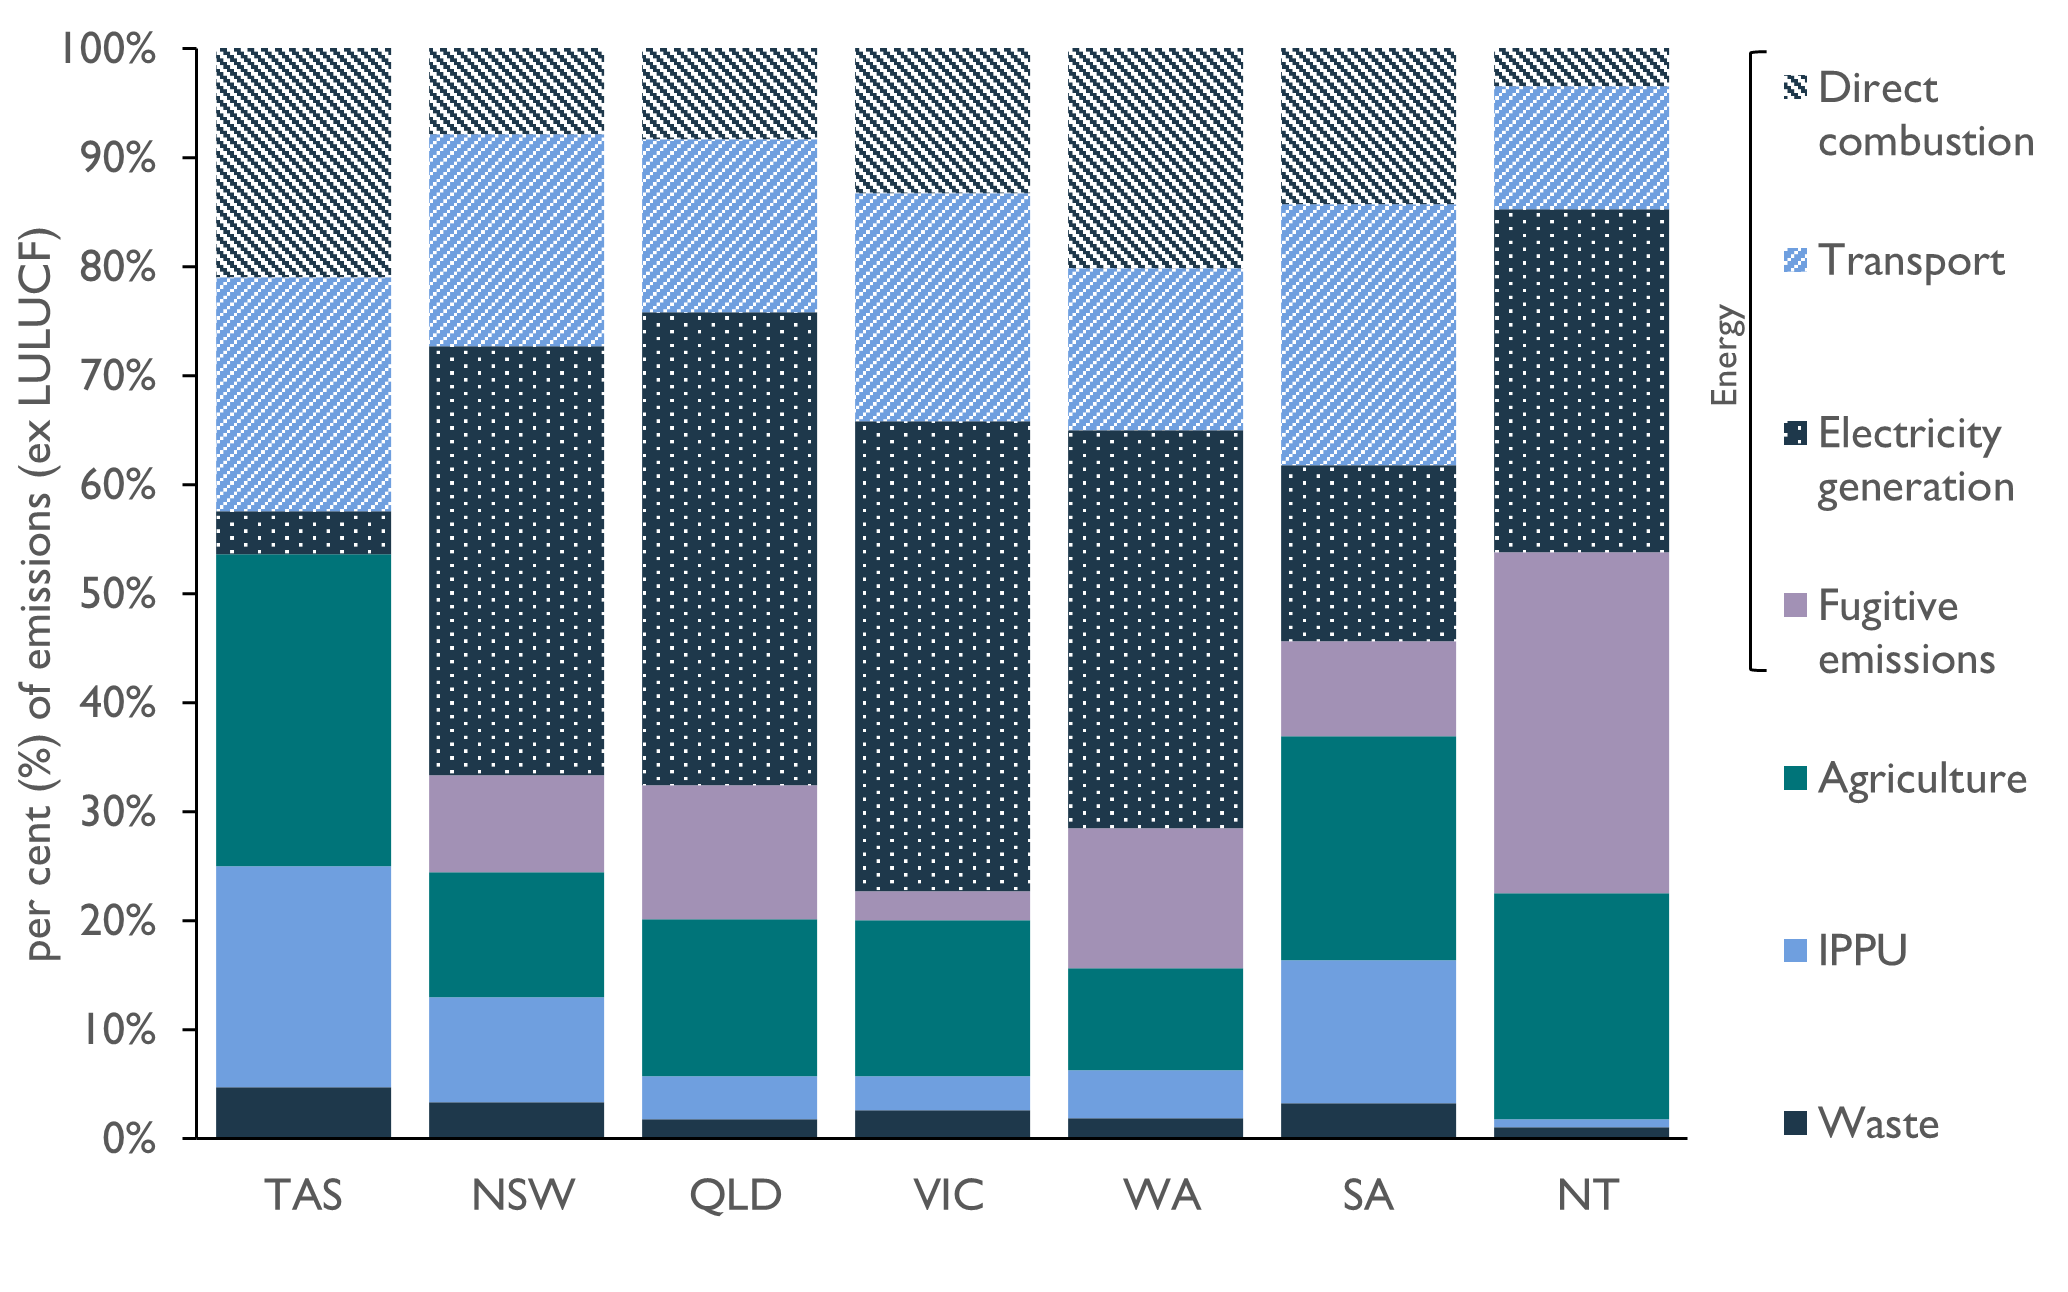 This figure is a stacked bar chart that highlights the differences in the relative contribution of each sector and energy-subsector to an Australian state or territory’s total emissions, excluding LULUCF. It shows that Tasmania’s emissions profile differs from other Australian states and territories, with much lower contributions from the electricity generation sub-sector to Tasmania’s total emissions (1.6 per cent share of total emissions). In contrast, it shows that electricity generation is the largest source of emissions in Victoria (55.3 per cent), Queensland (42.9 per cent), New South Wales (38.3 per cent), WA (41.8 per cent), and the NT (41.7 per cent). Transport and agriculture are the largest sub-sectors in SA (28.5 per cent and 28.3 per cent respectively). The figure also shows that emissions from Tasmania’s transport (21.0 per cent), direct combustion (20.9 per cent), IPPU (18.7 per cent) and agriculture (33.1 per cent) sectors make a larger relative contribution to the state’s total emissions than in most other jurisdictions.